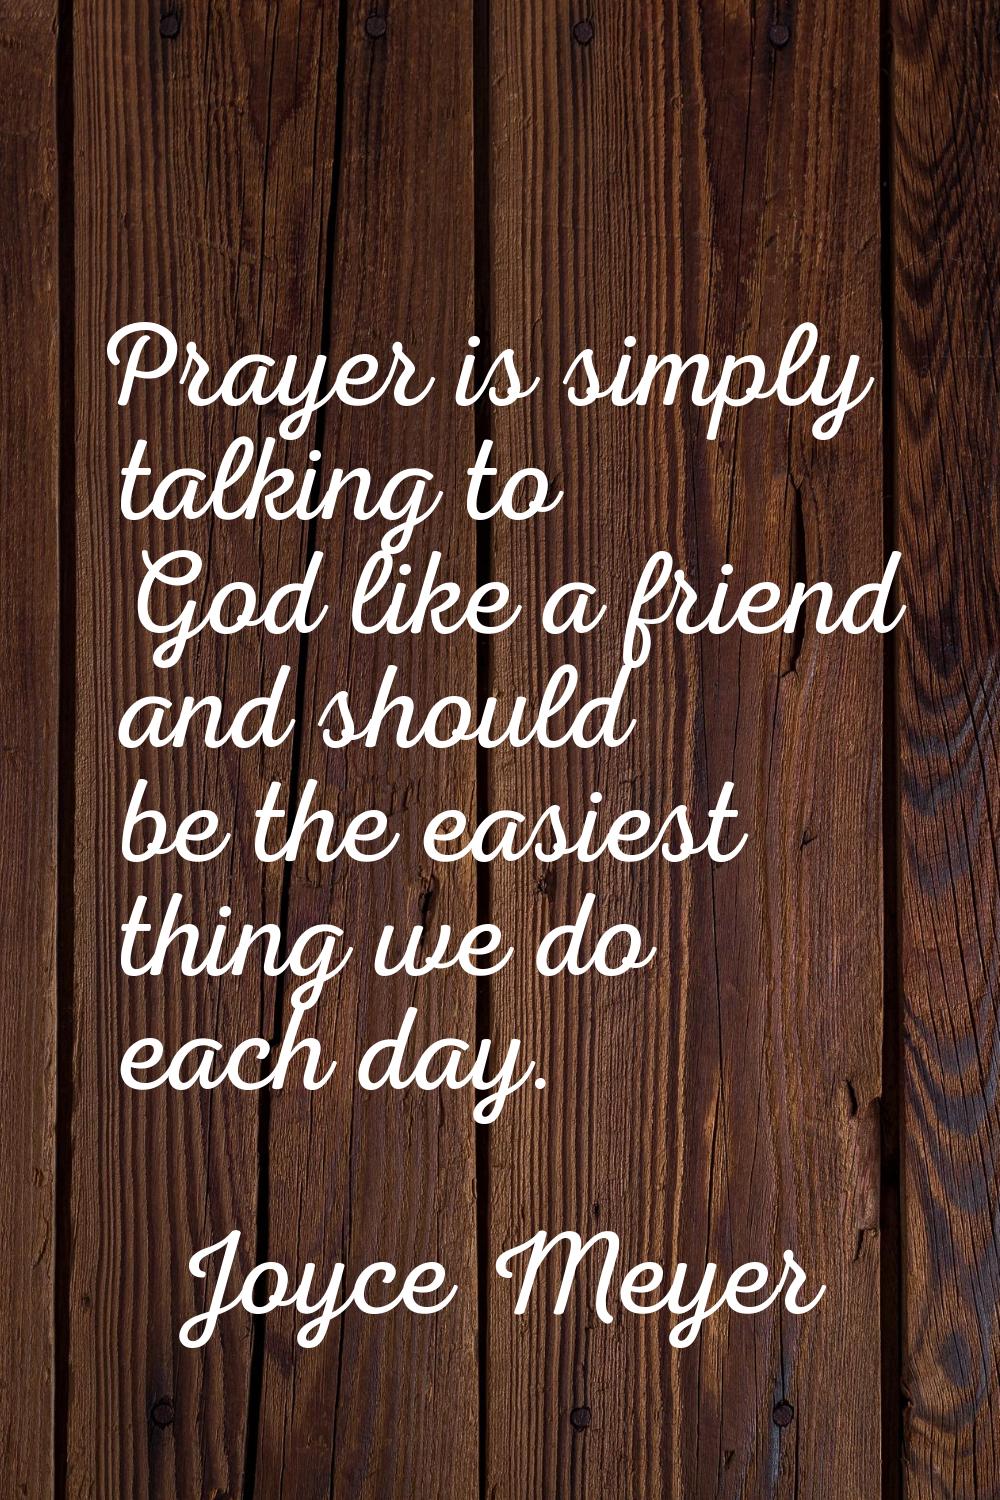 Prayer is simply talking to God like a friend and should be the easiest thing we do each day.